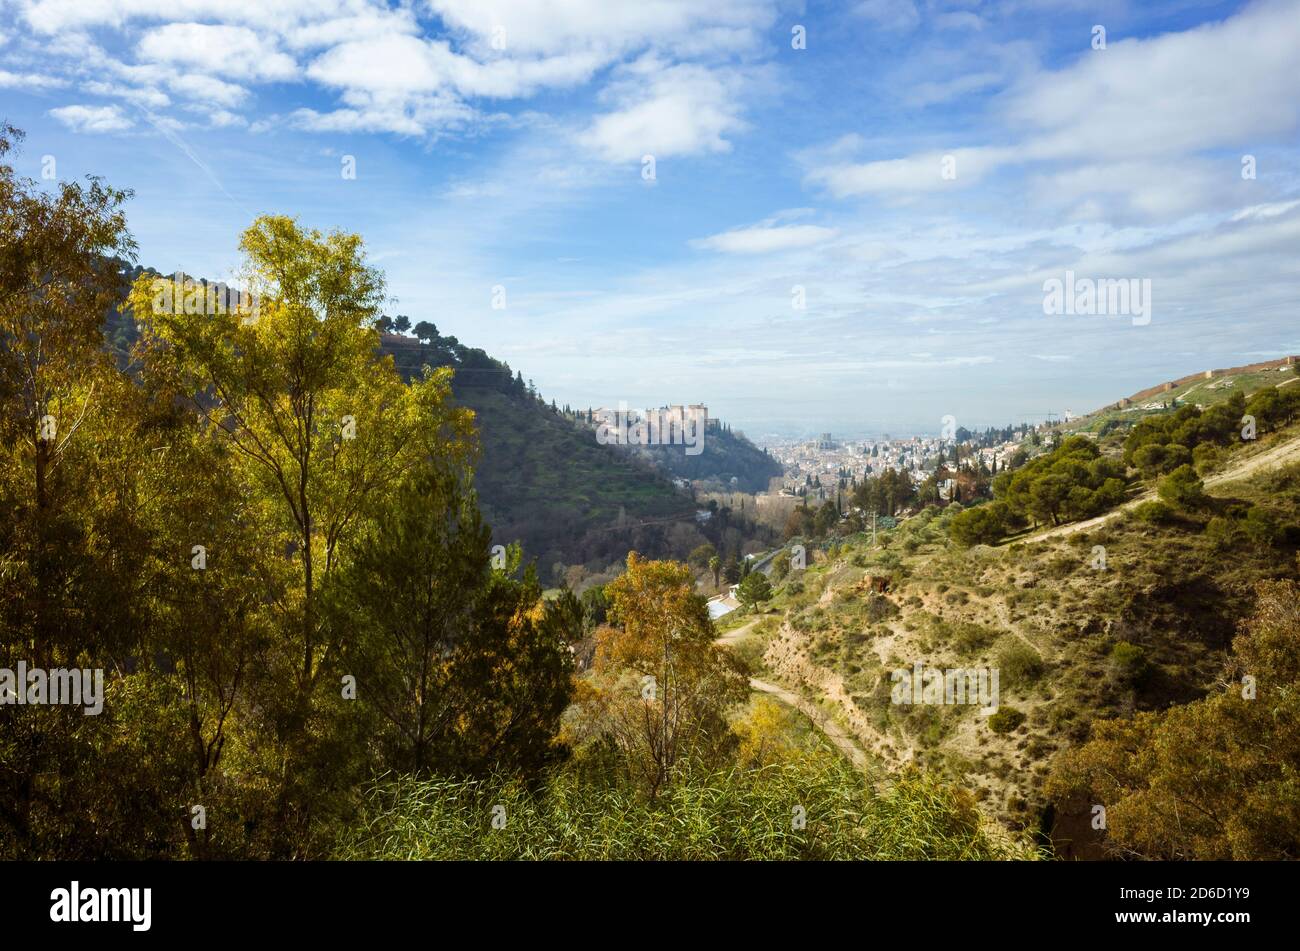 Granada, Spain : Valparaiso valley as seen from the Sacromonte Abbey with the Alhambra and Granada city in background. Stock Photo